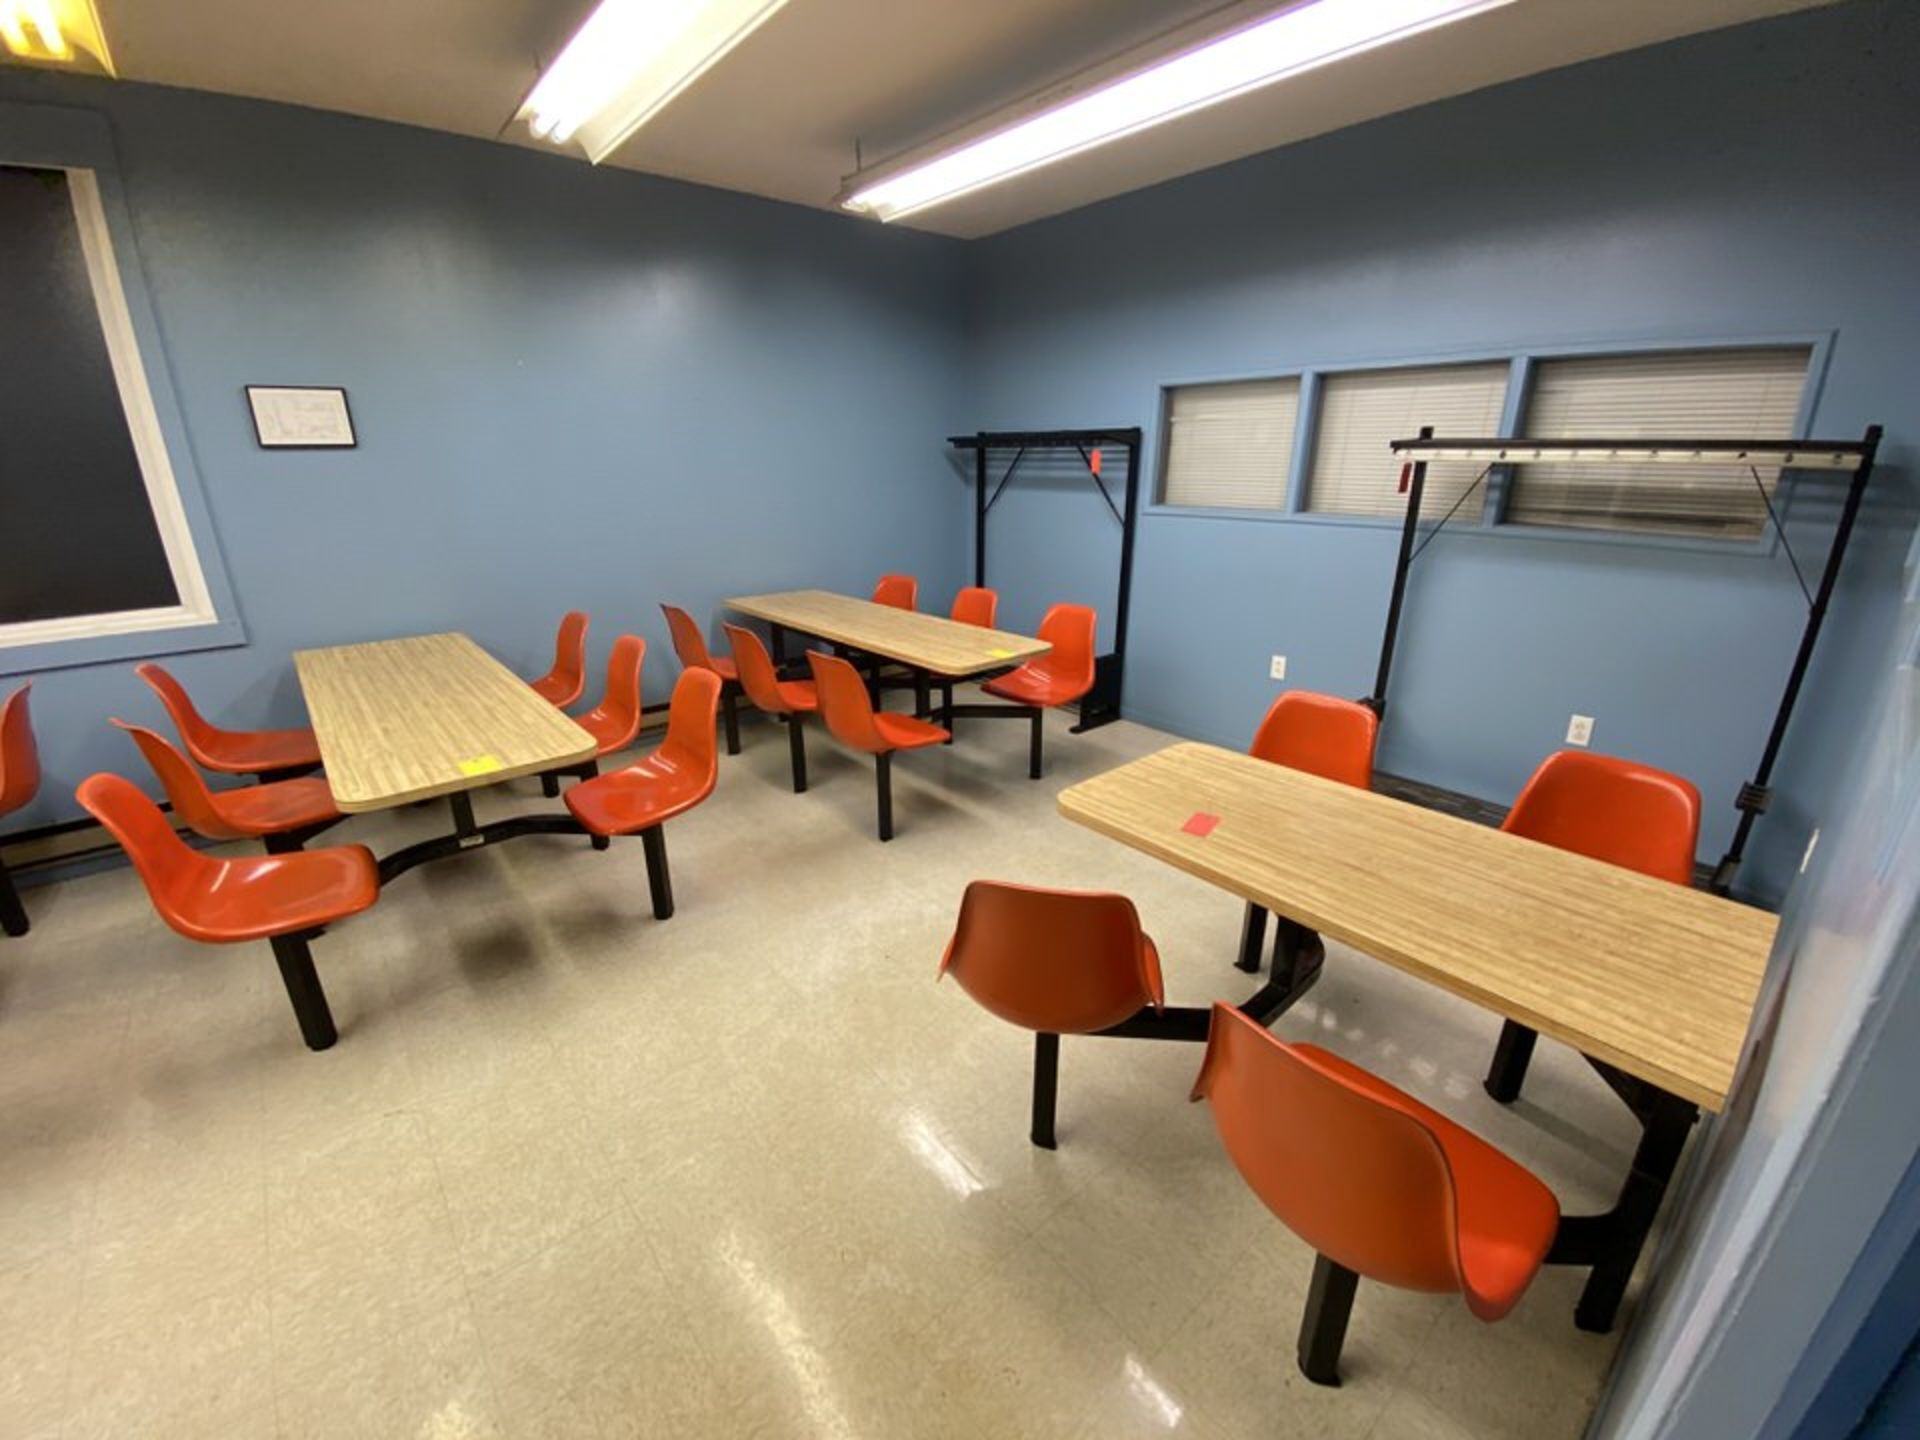 Lunch Room Contents: Tables, Chairs, Refrigerator, Microwave, Coffee Maker - Image 2 of 2